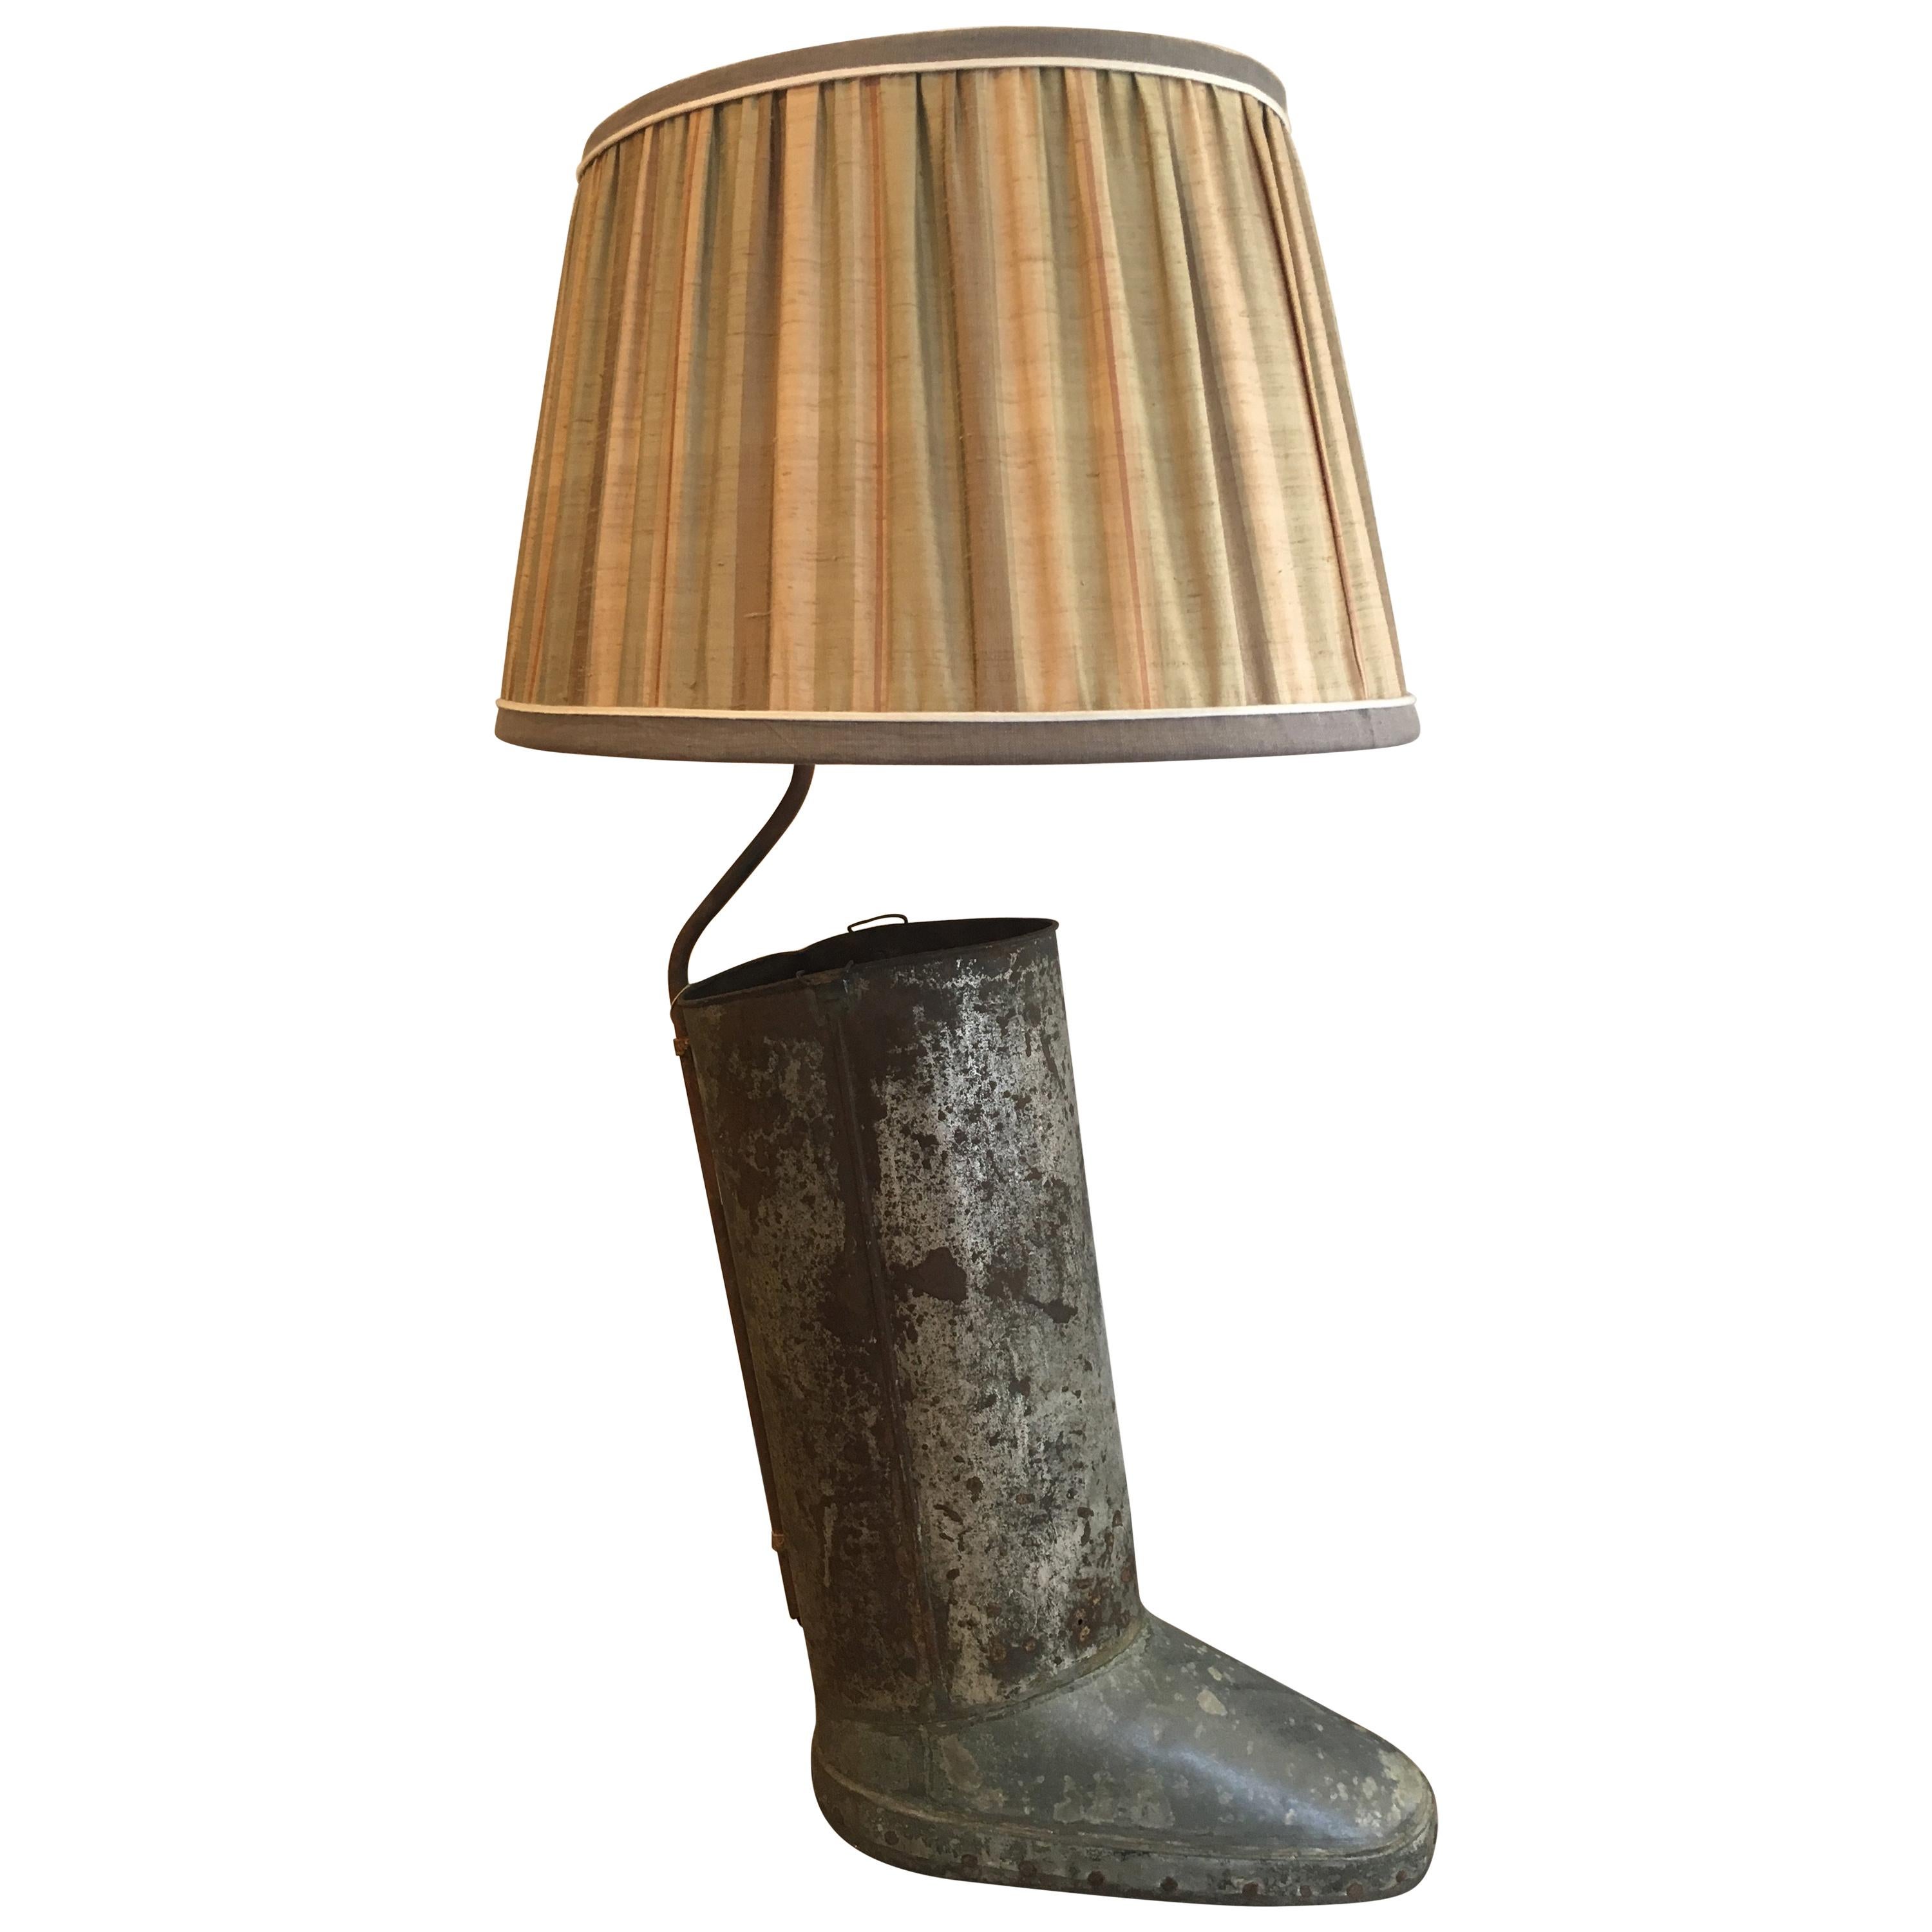 French Table Lamp Made with an Old Iron Boot Ombrella Stand from 20th Century For Sale